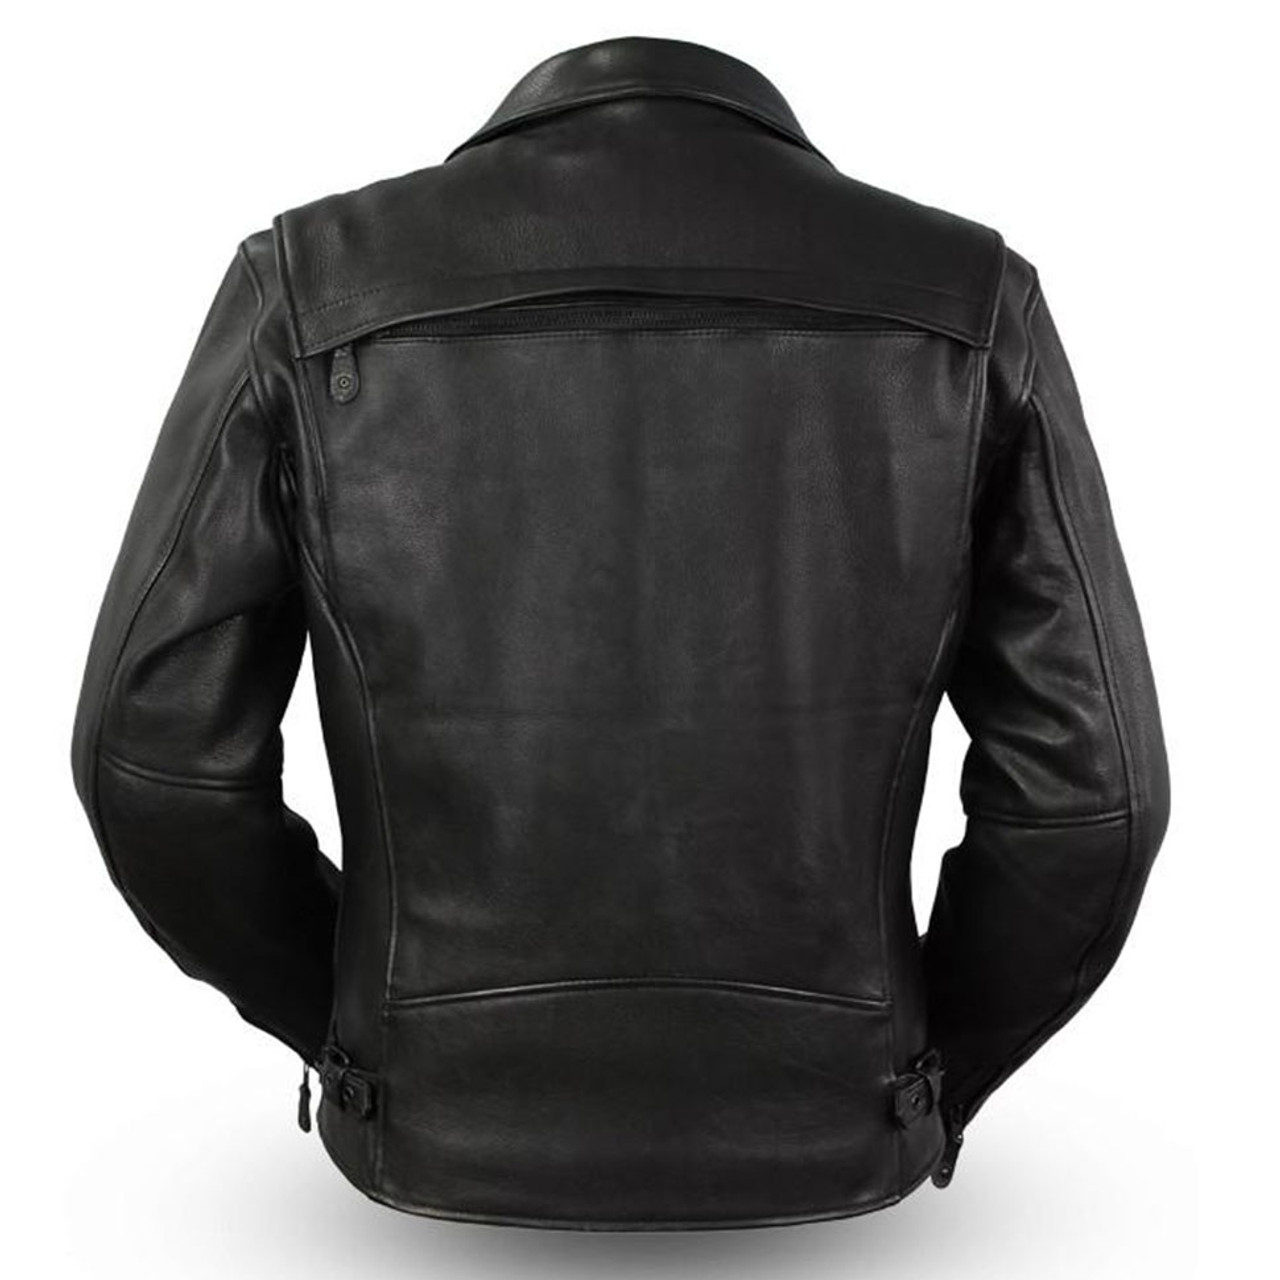 First Mfg. Night Rider Black Leather Motorcycle Jacket - Get Lowered Cycles